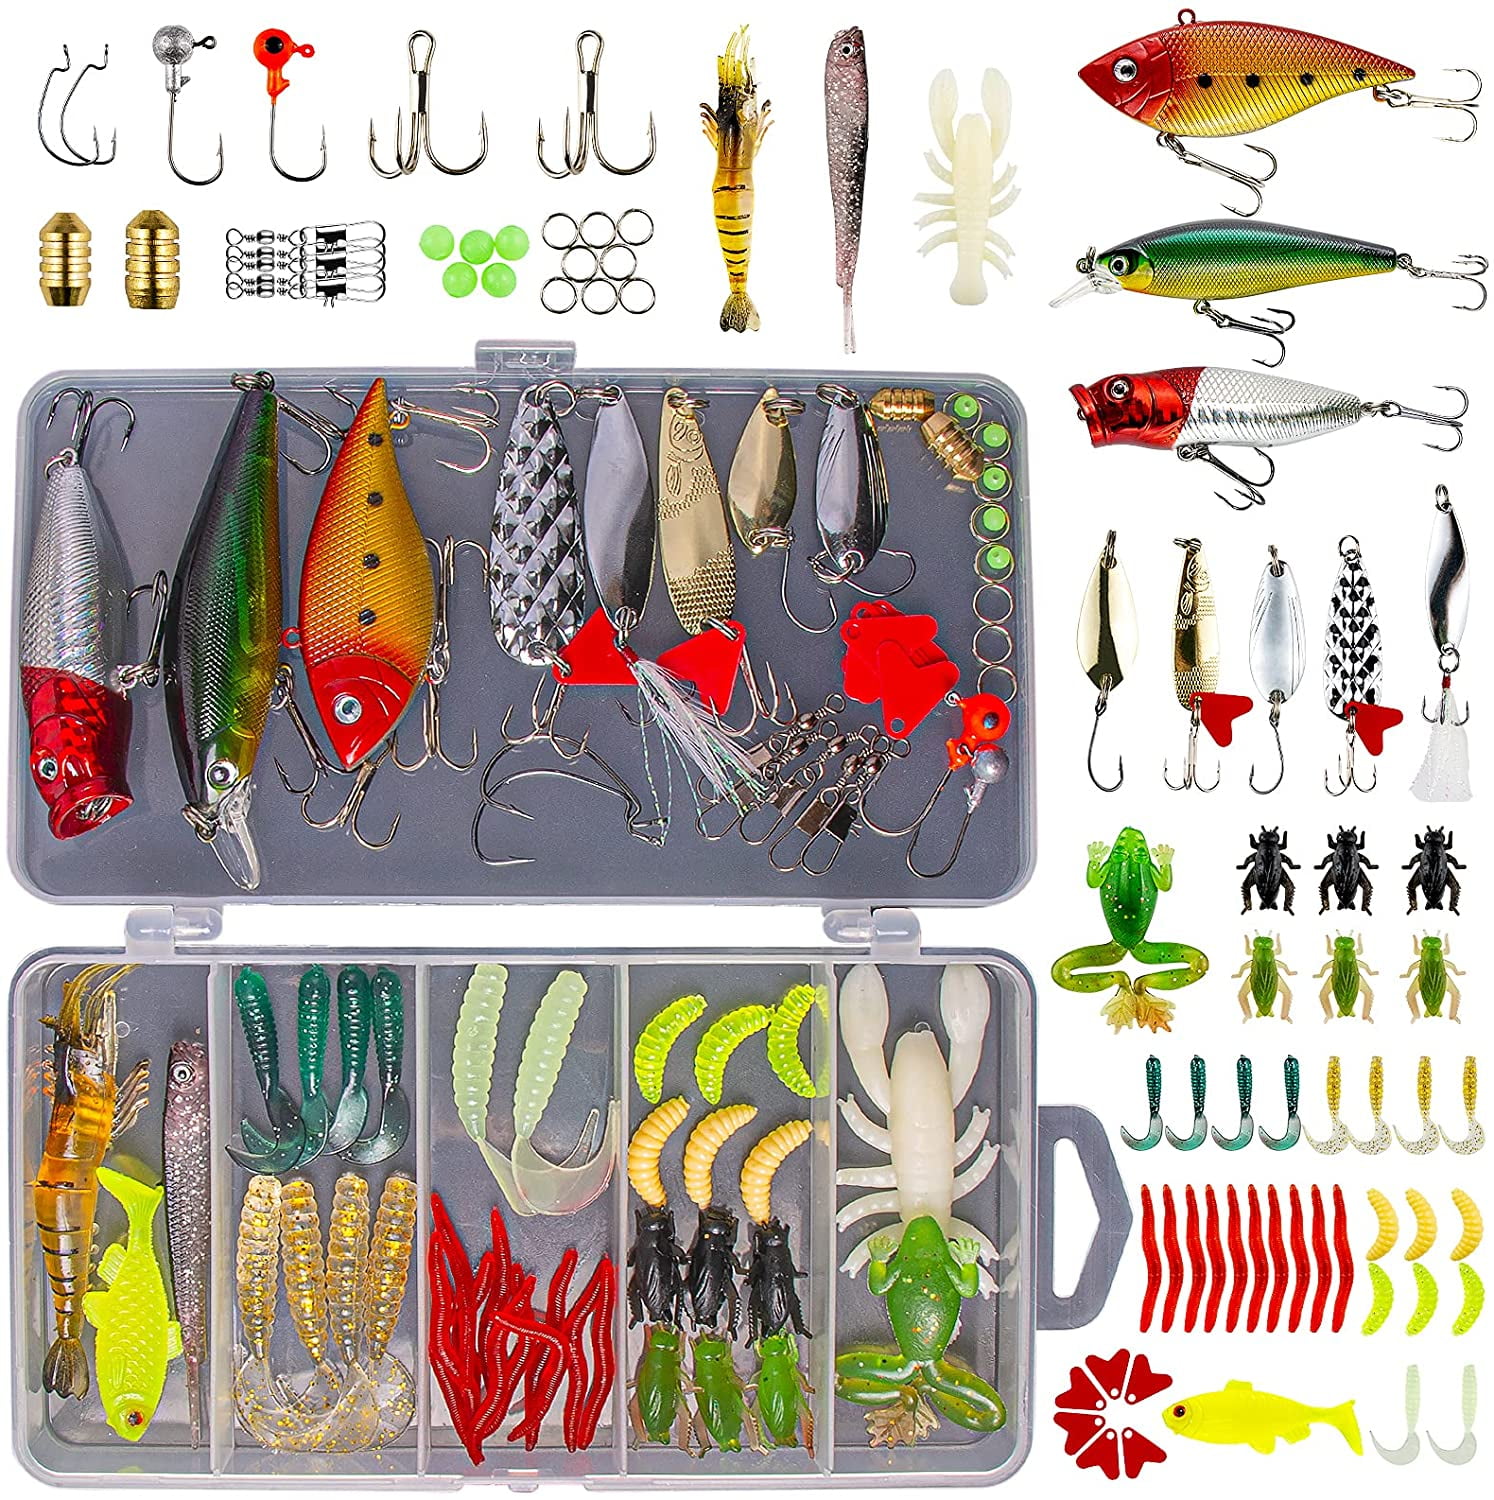 MonkeyJack 30Pcs Mixed Fishing Metal Lures Colorful Casting Fishing Spoons Tackle Kit for Salmon Bass Trout 